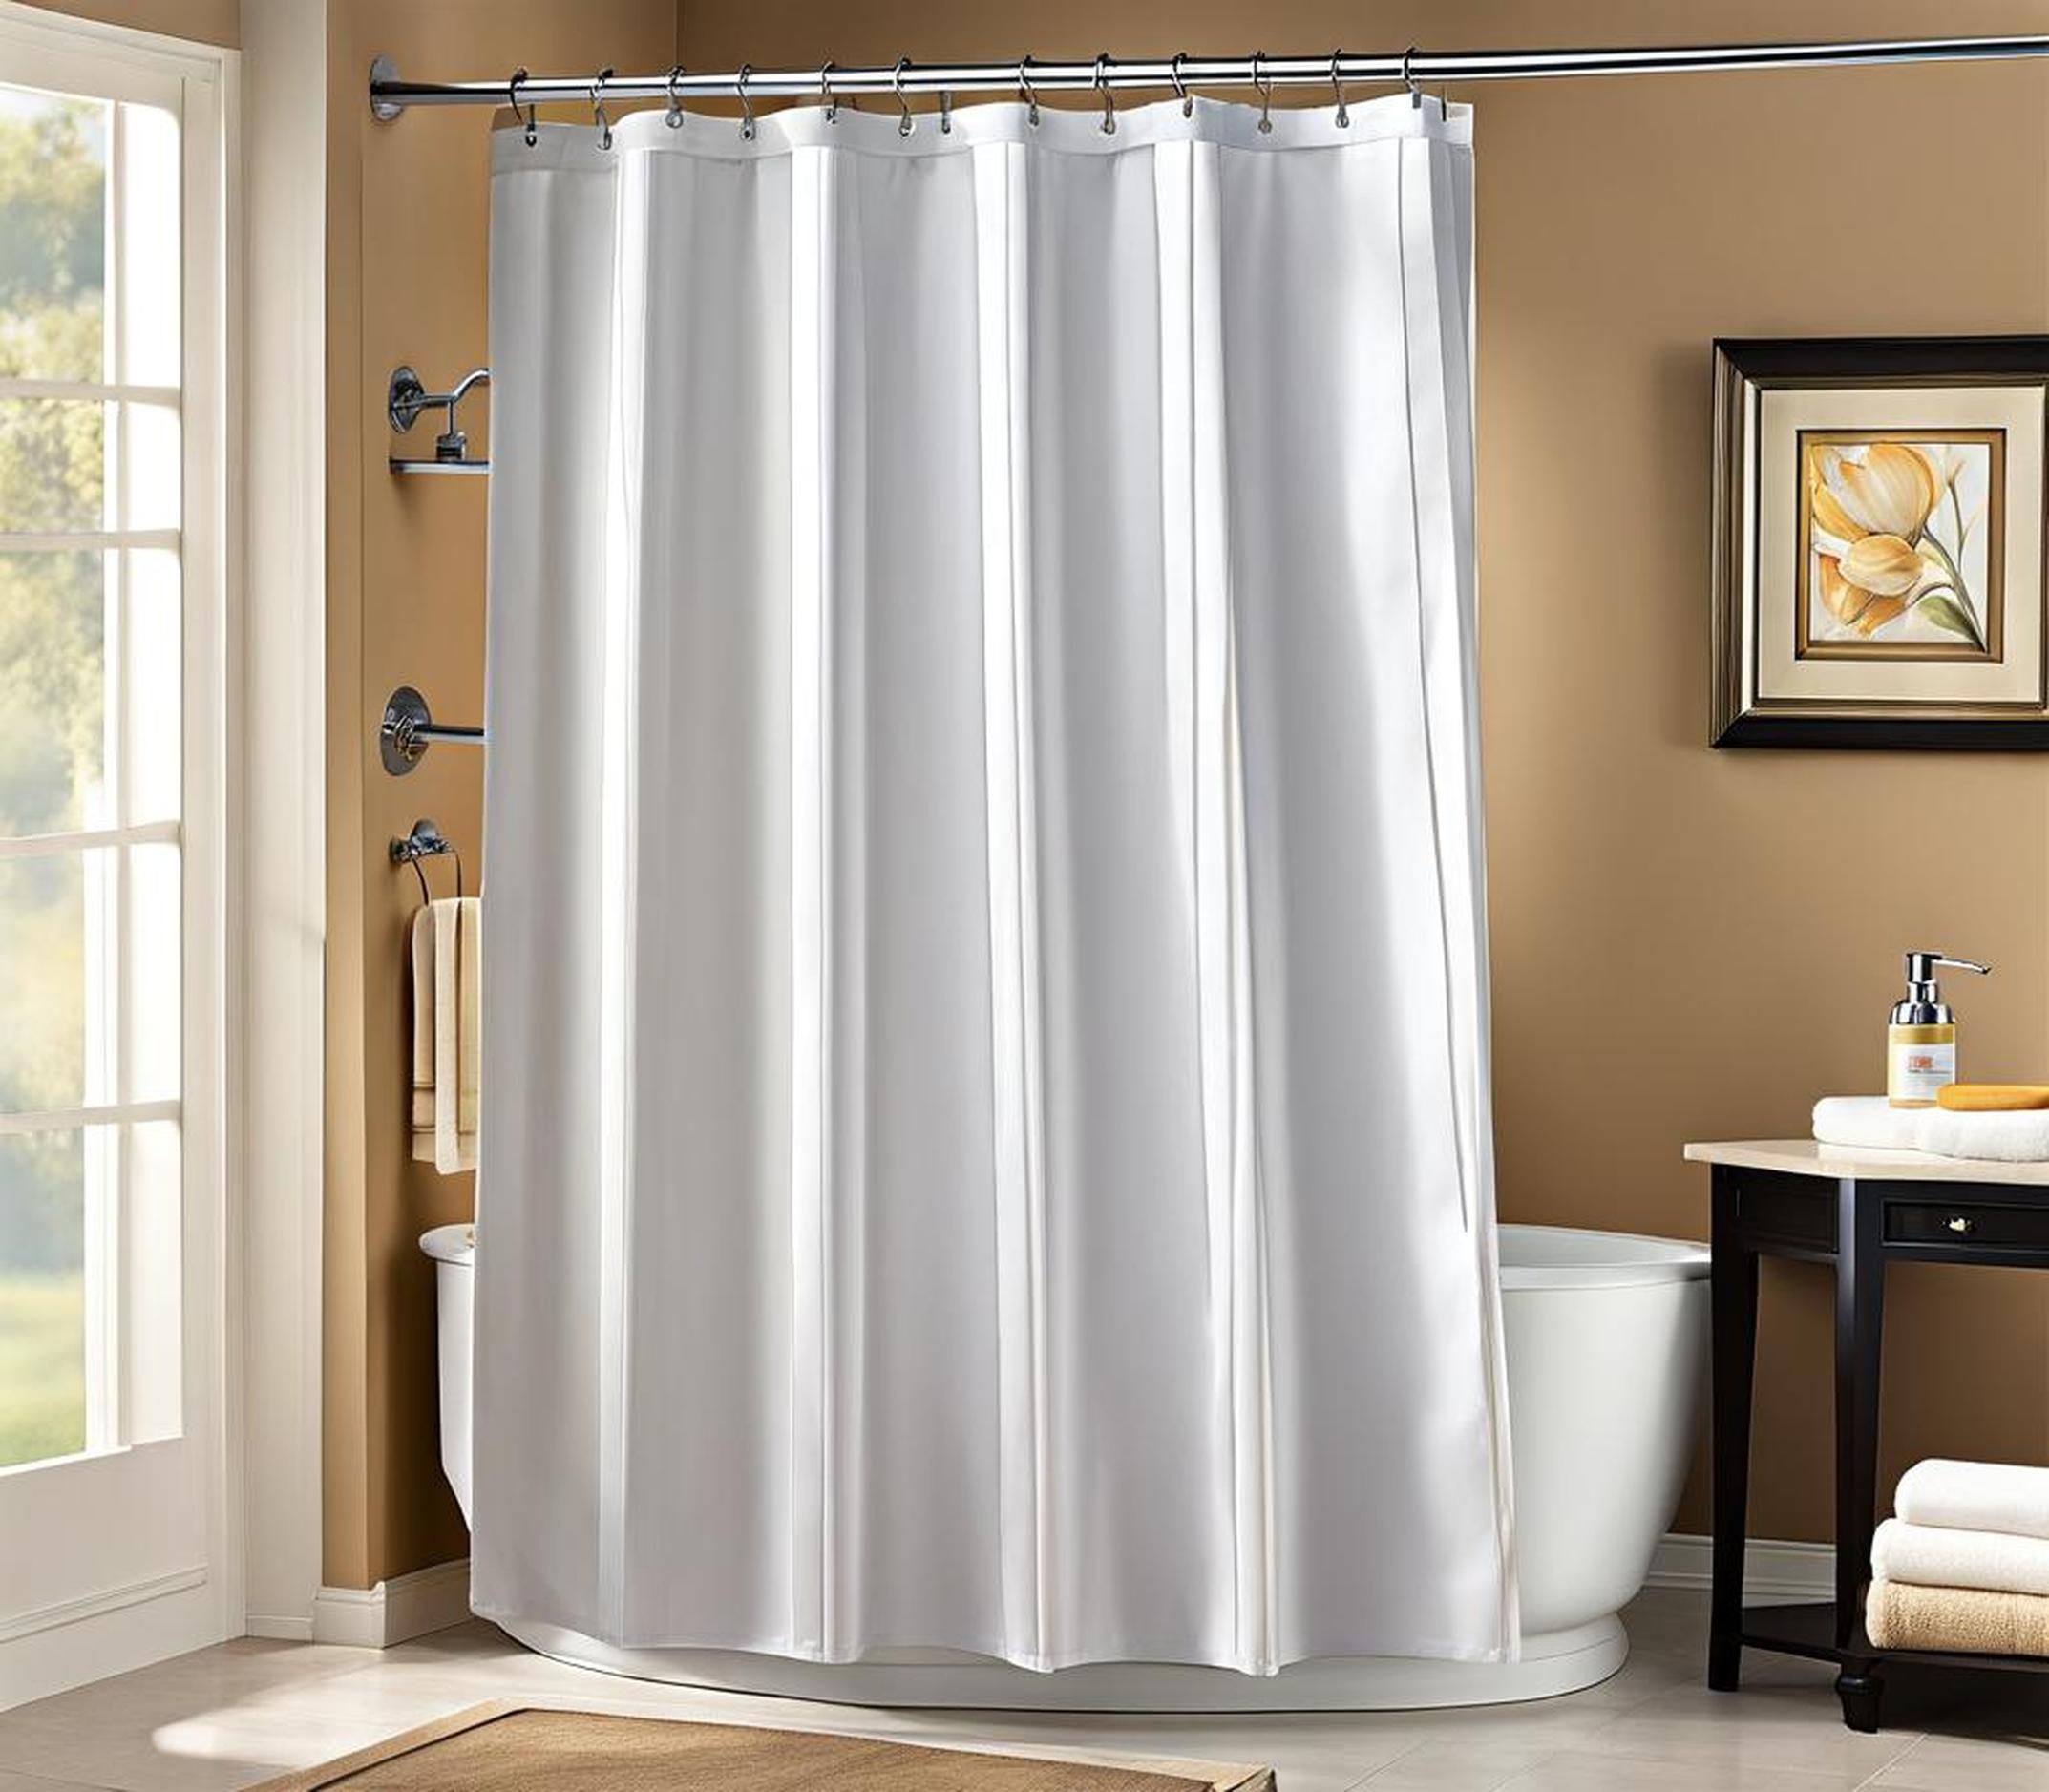 Lock Down Shower Water with Clorox Curtain Liners